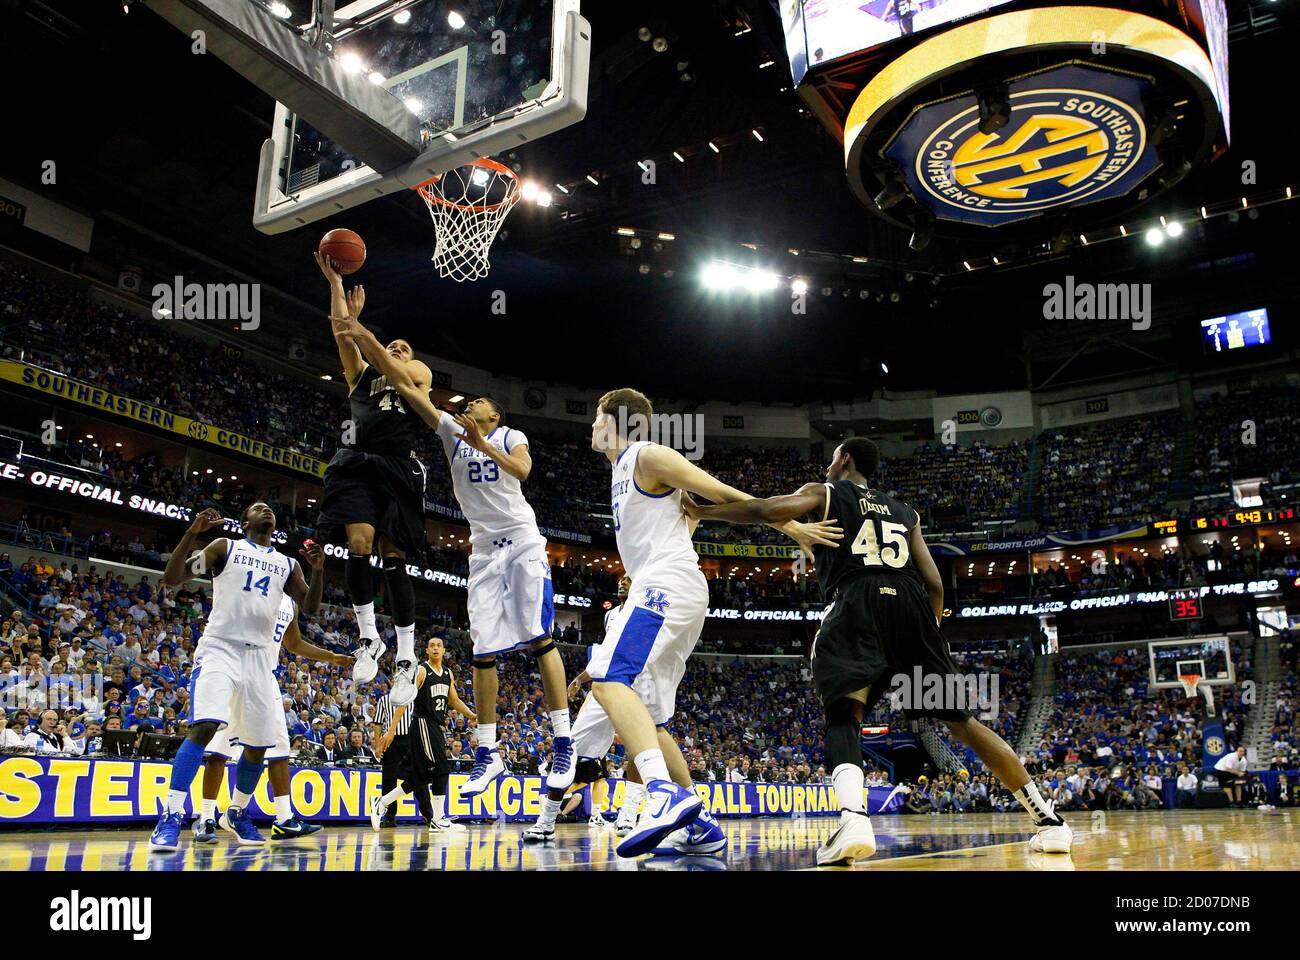 Vanderbilt Commodores forward Jeffery Taylor (front 2nd L) shoots over  Kentucky Wildcats forward Anthony Davis (front C) during the final of the  SEC men's NCAA basketball tournament in New Orleans, Louisiana March